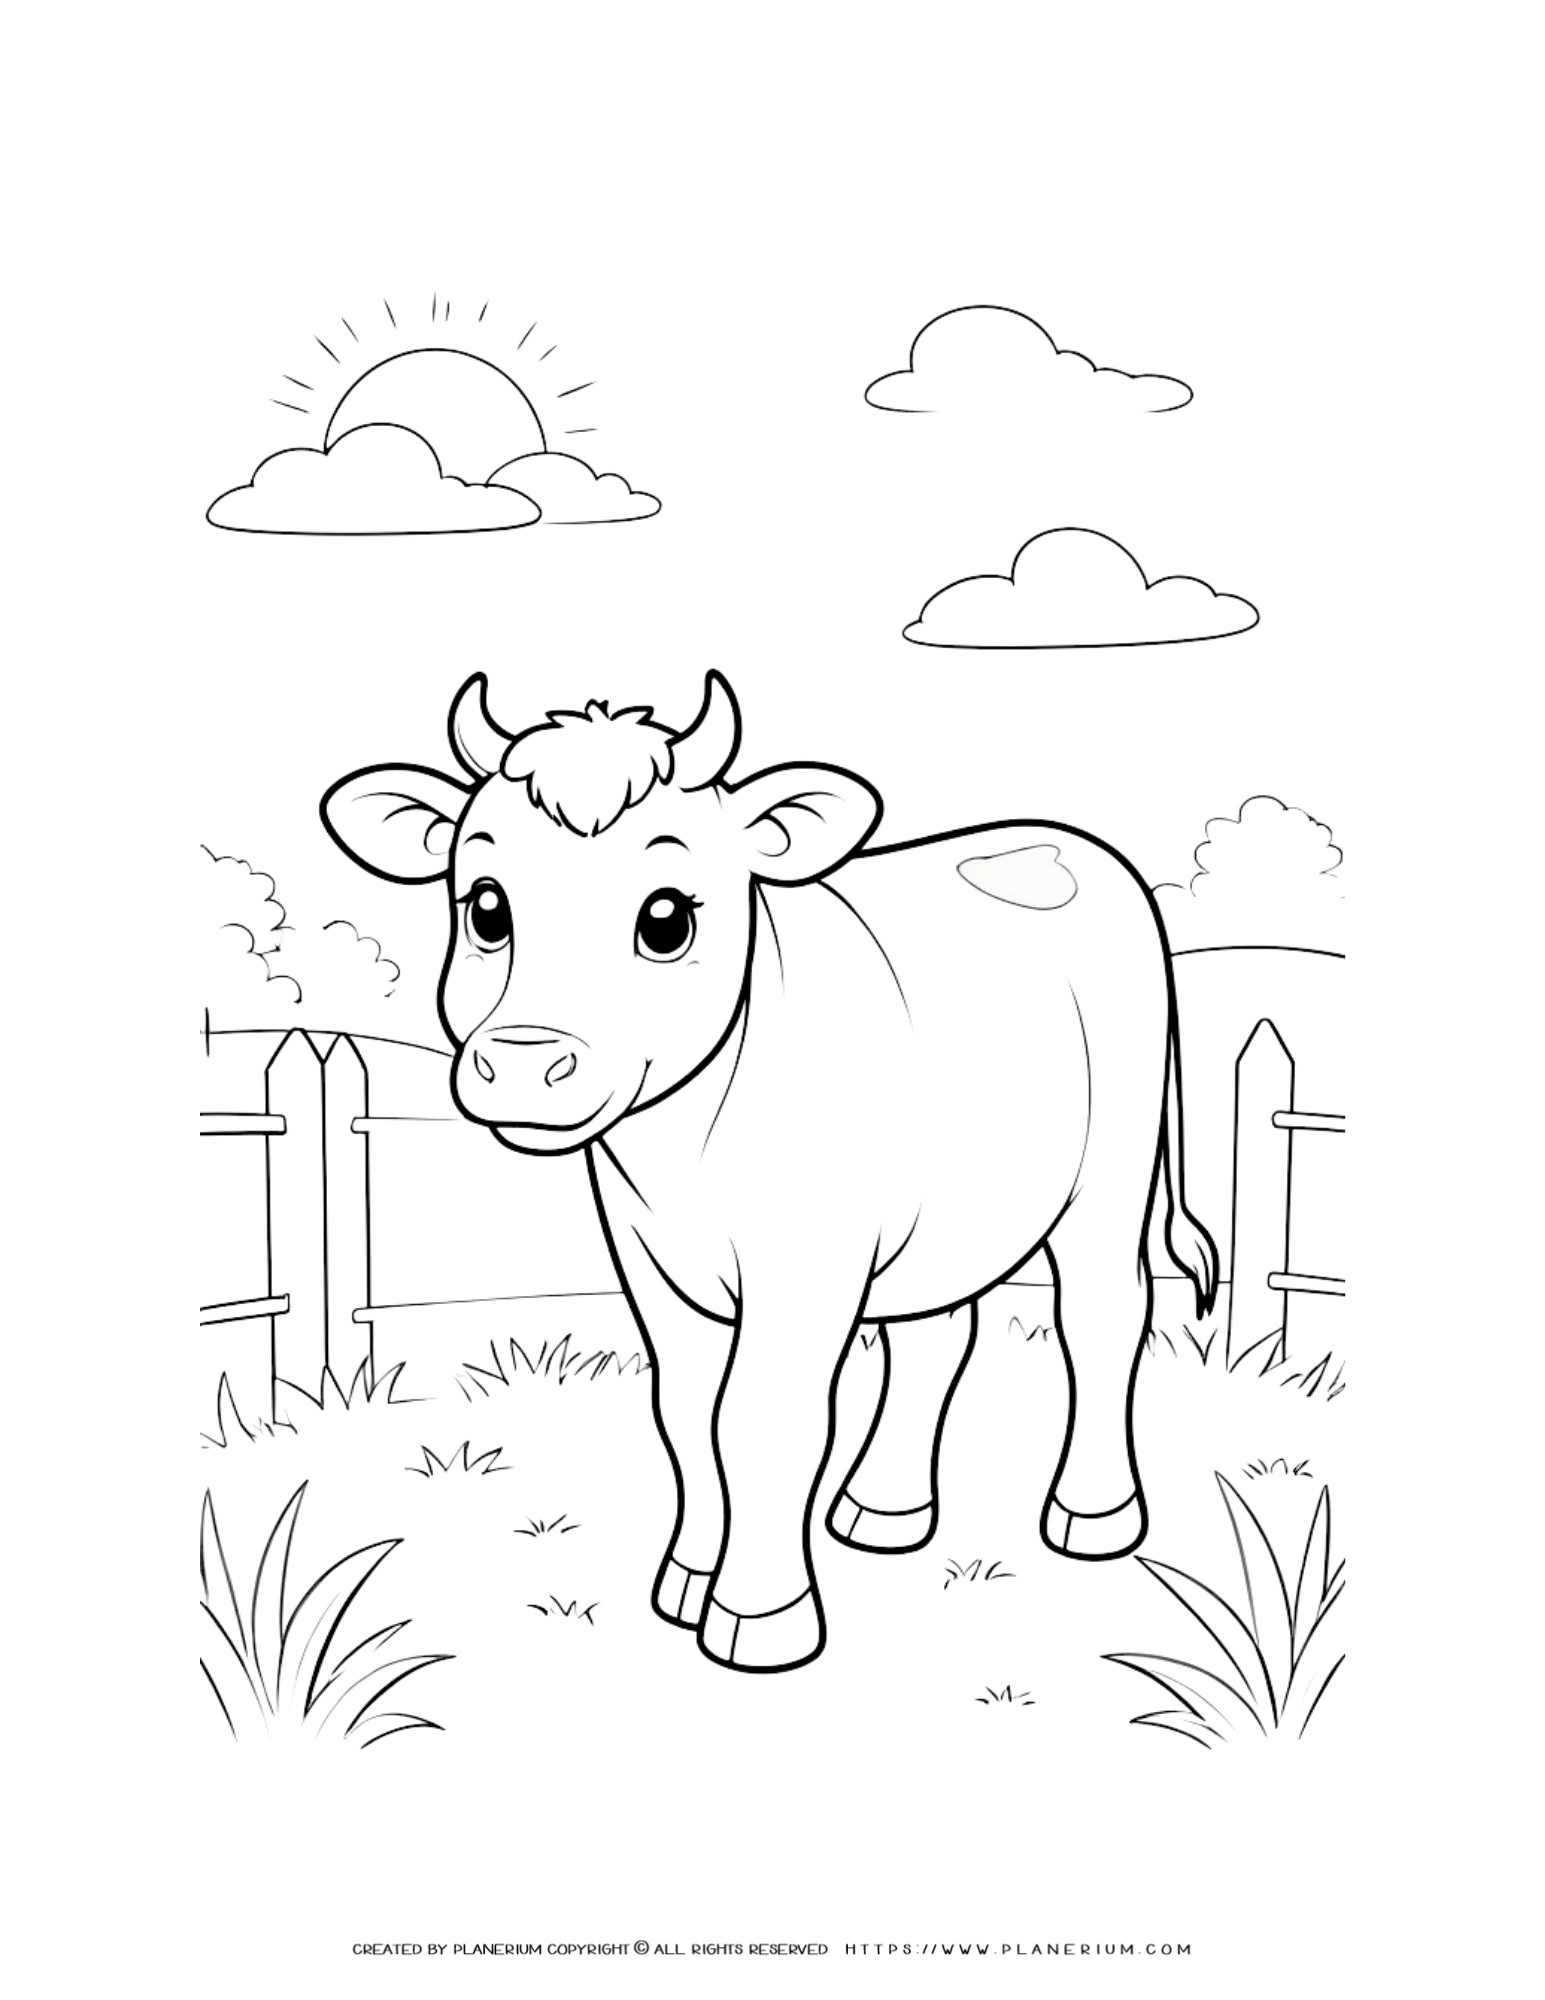 Cute Baby Cow Drawing Coloring Page for Kids - Enjoyable and ...